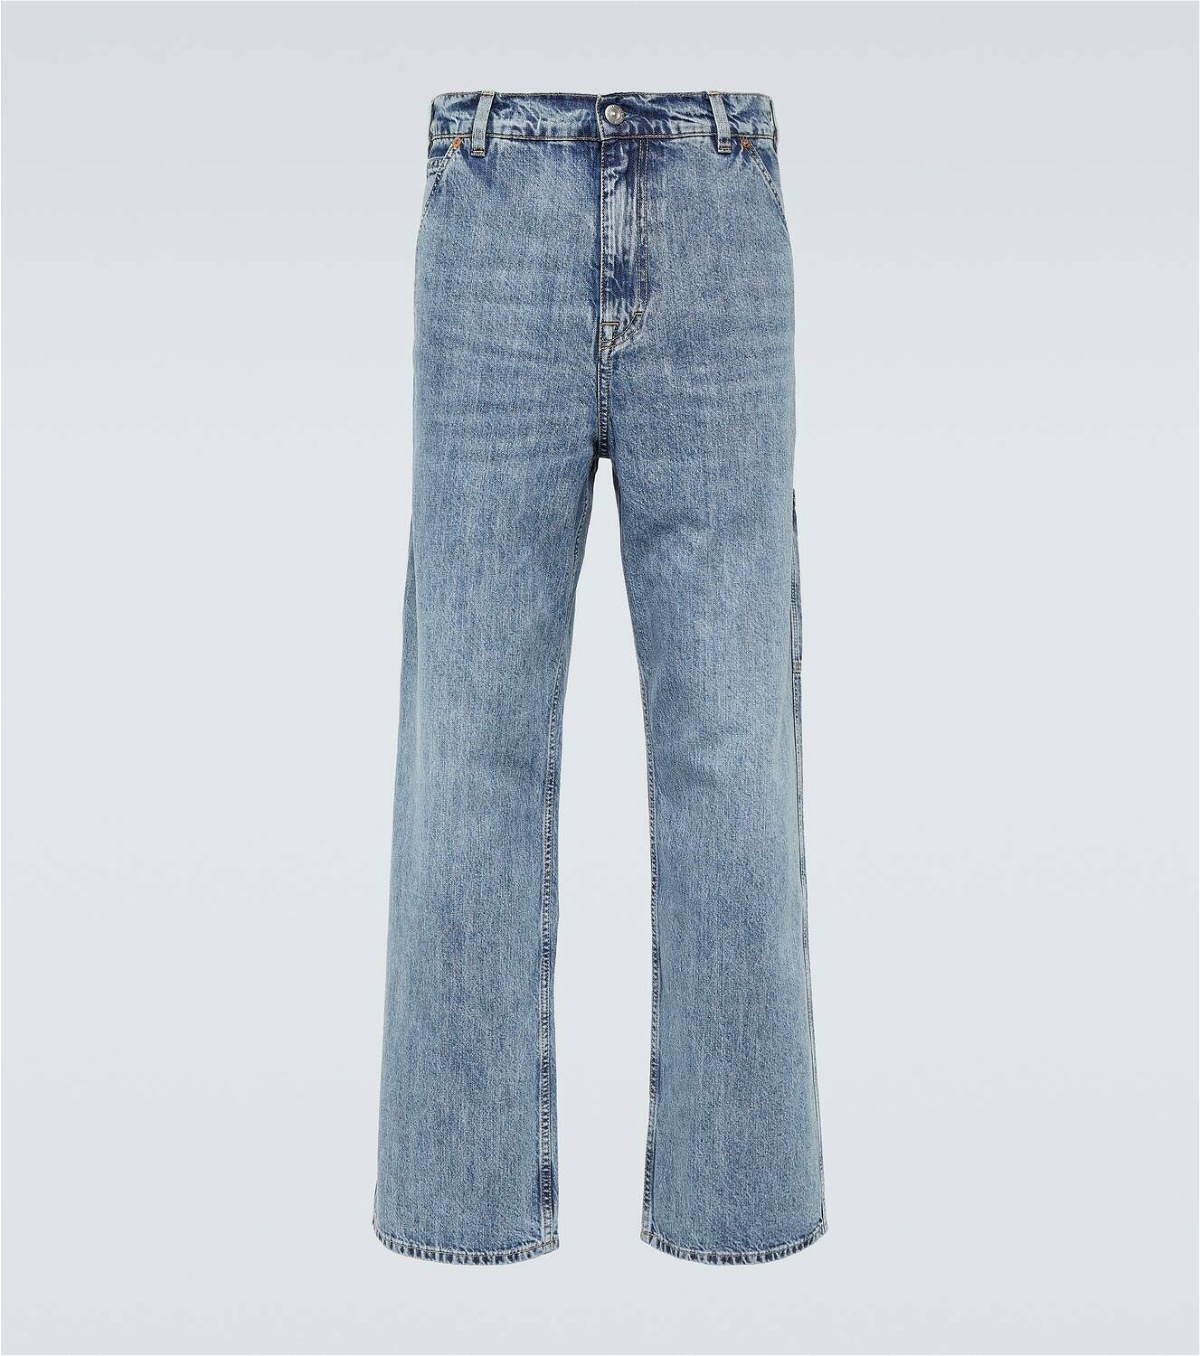 Our Legacy Joiner straight jeans